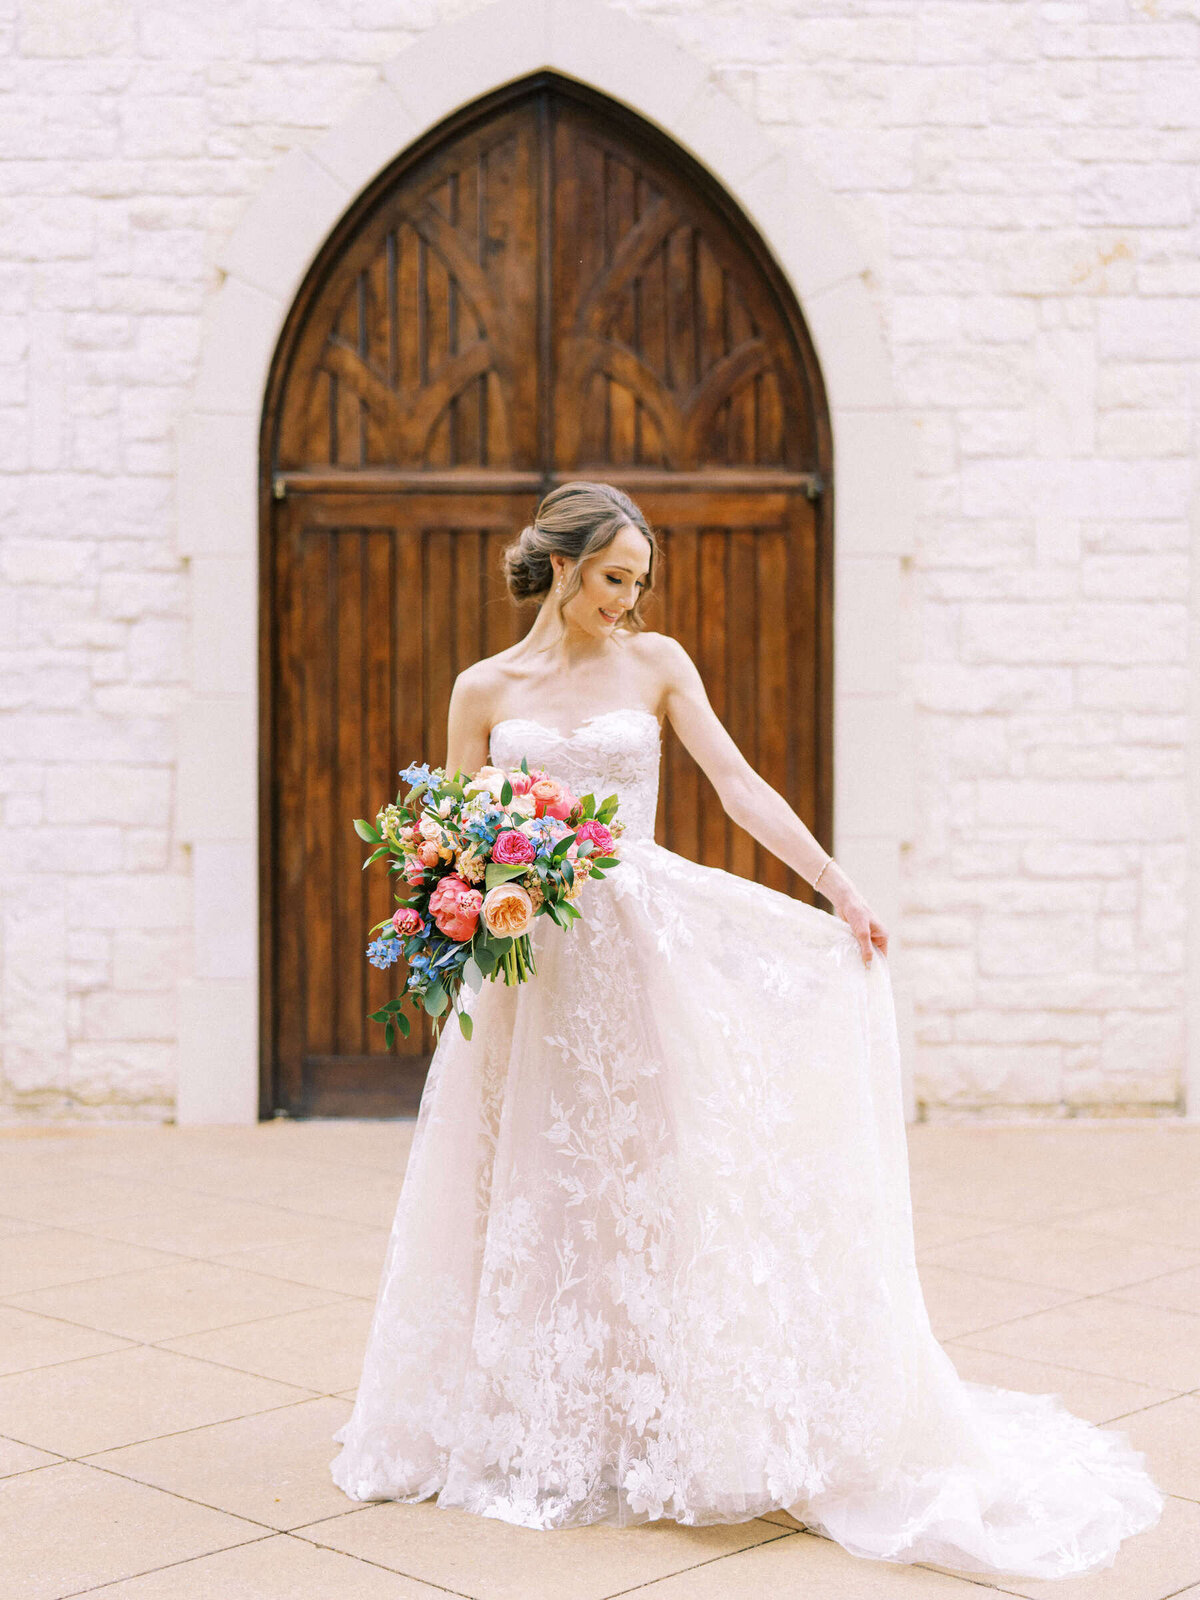 Bride stands in front of arched wedding chapel doors in Monique Lhuillier wedding dress holding colorful bouquet